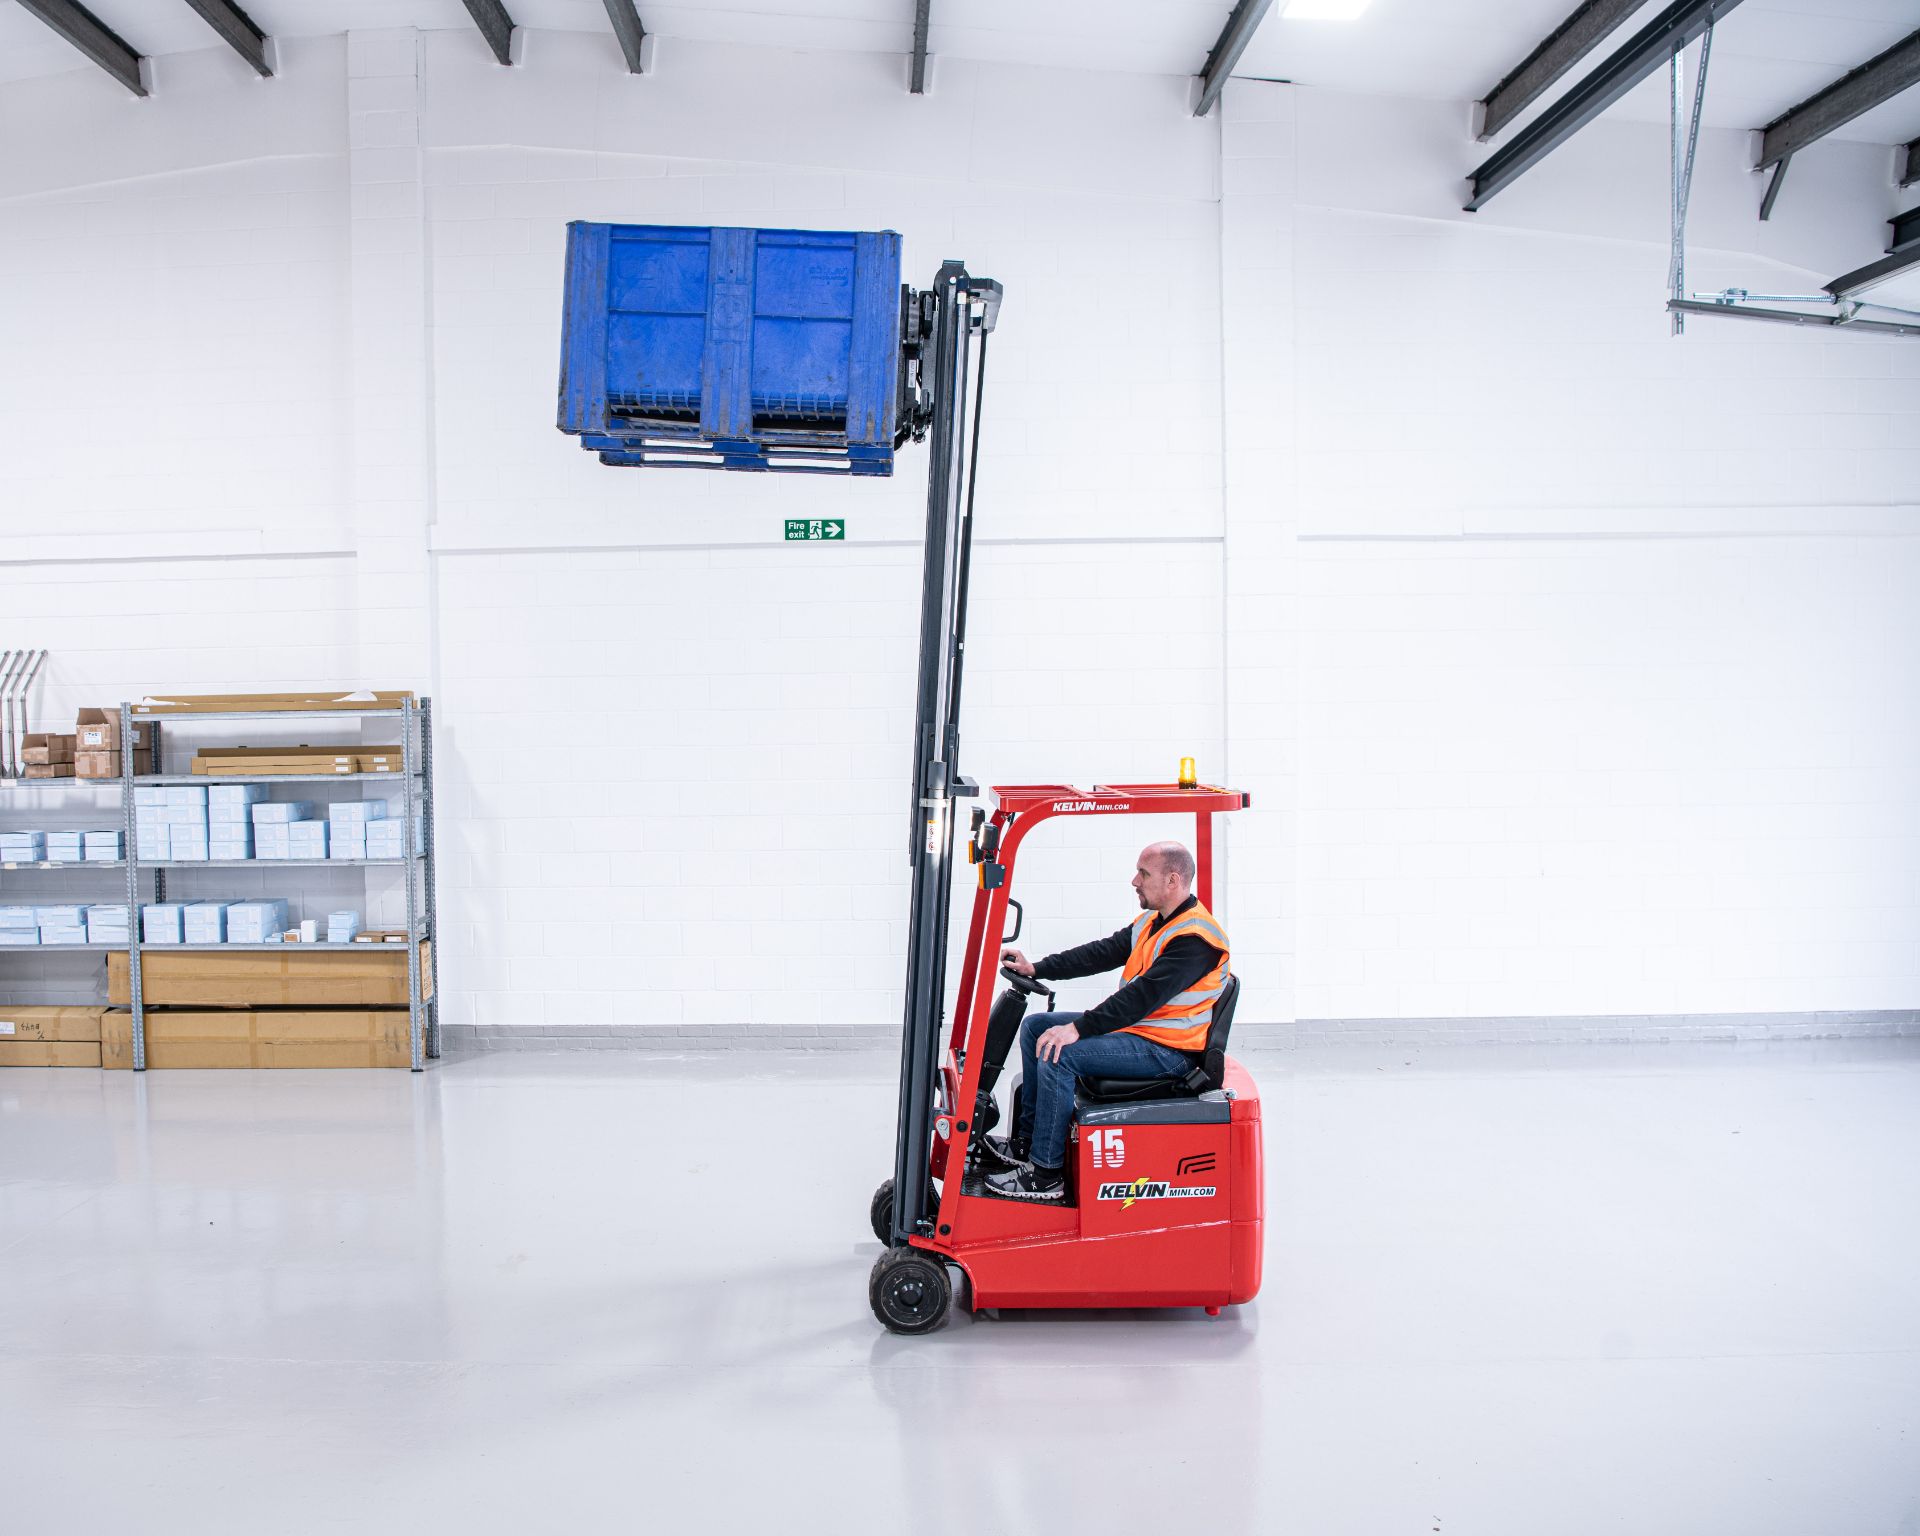 BRAND NEW EX DEMO!! BARGAIN! KELVIN ELECTRIC MINI FORKLIFT TRUCK FOR TIGHT SPACES *RESERVE REDUCED* - Image 2 of 10